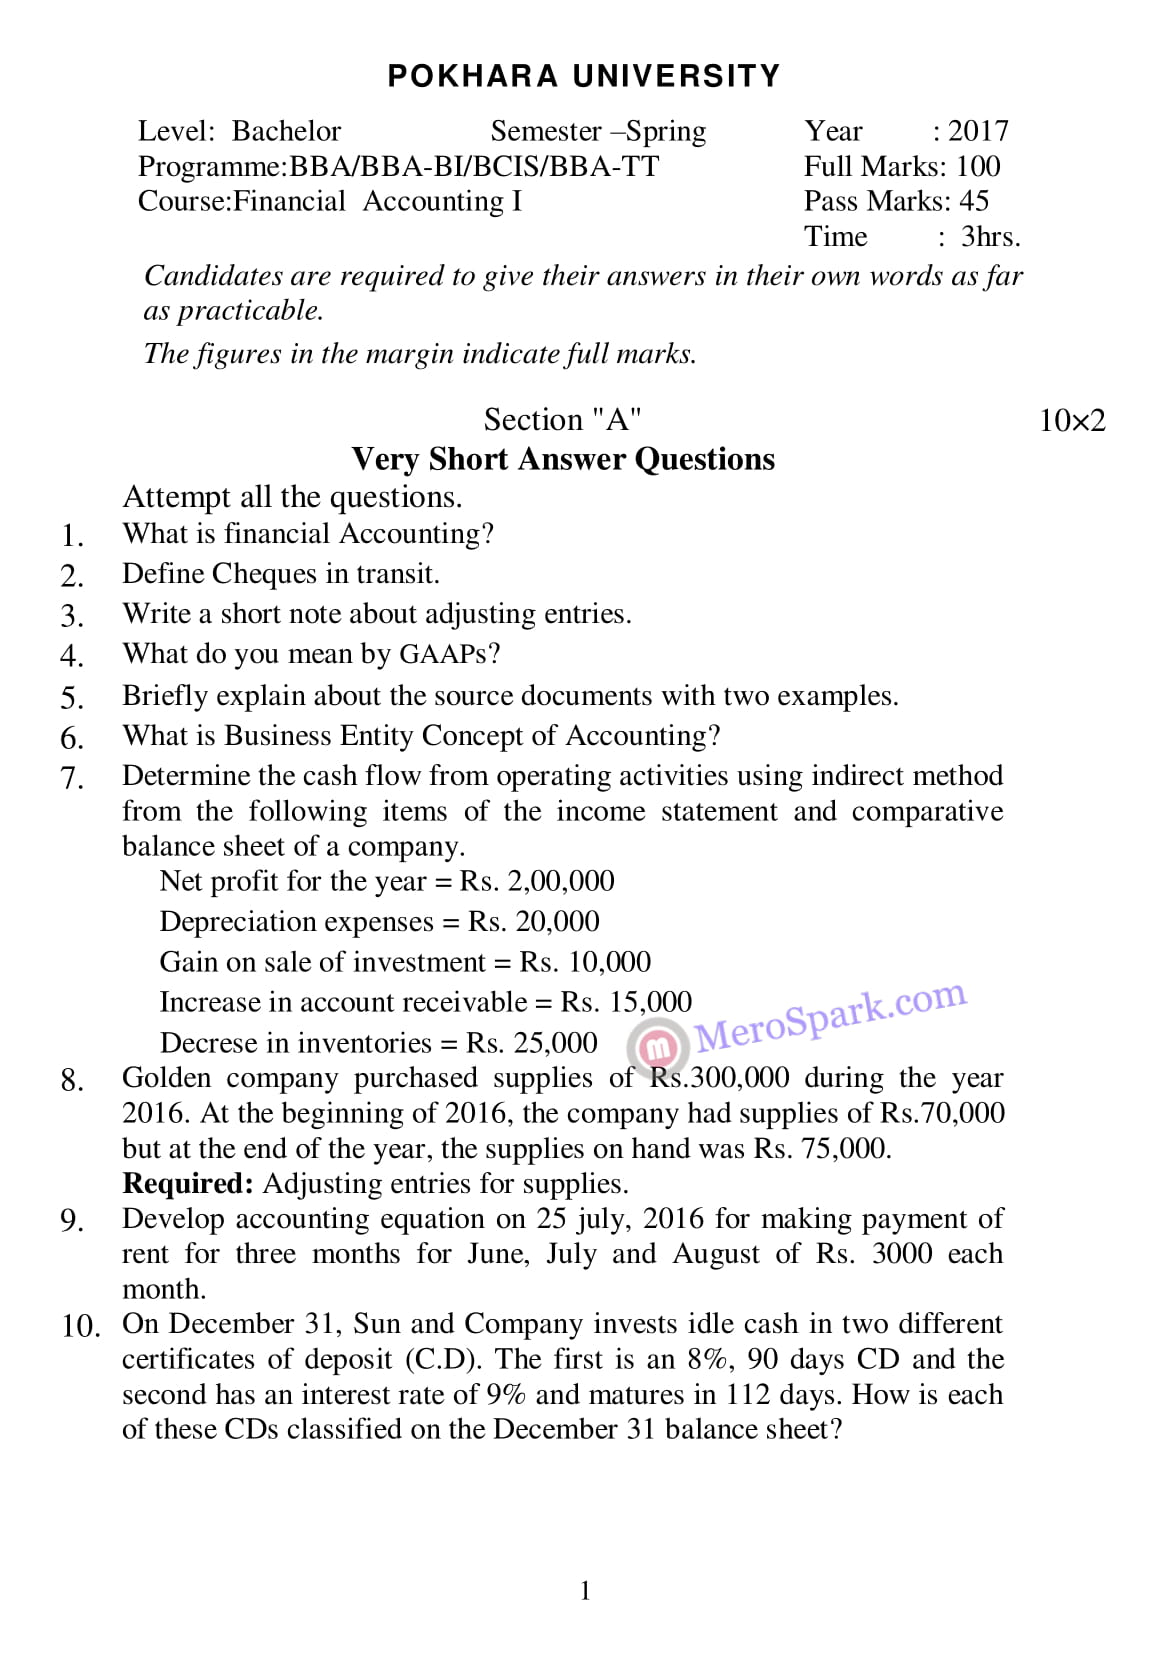 financial accounting exam questions and answers